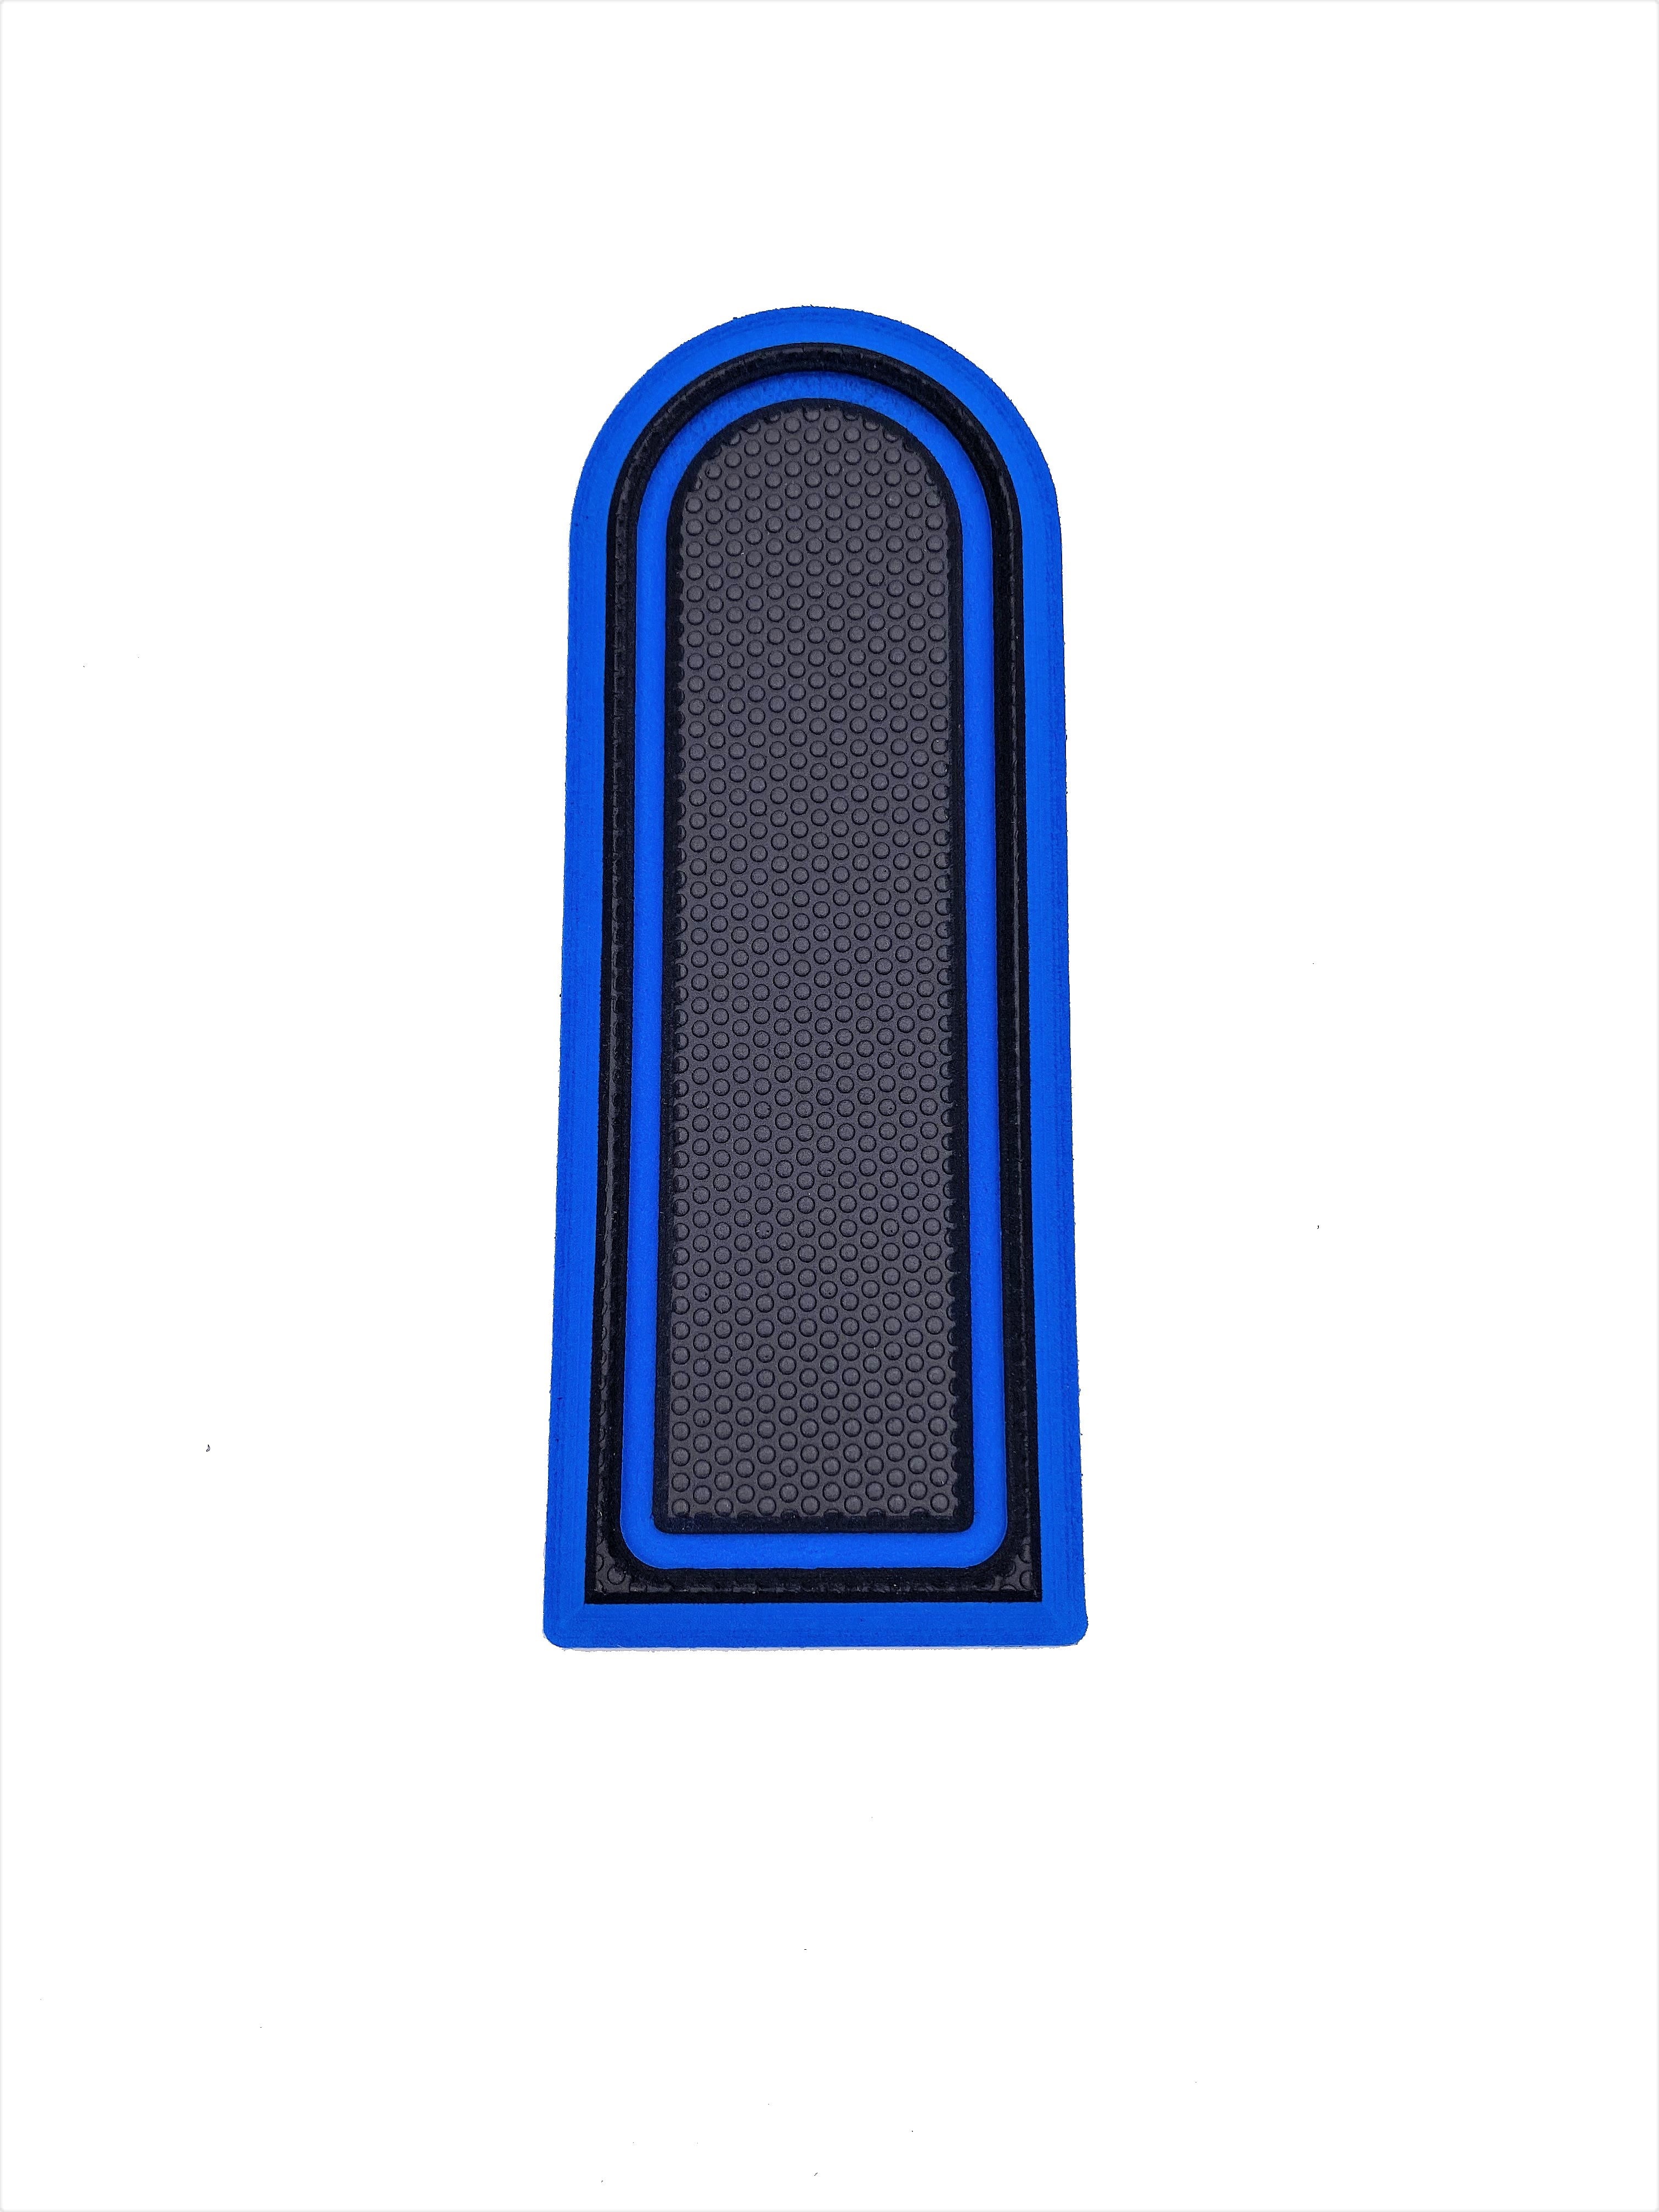 Trolling Motor Pedal Pad for the Ultrex and Ultrex Quest – DD26 Fishing